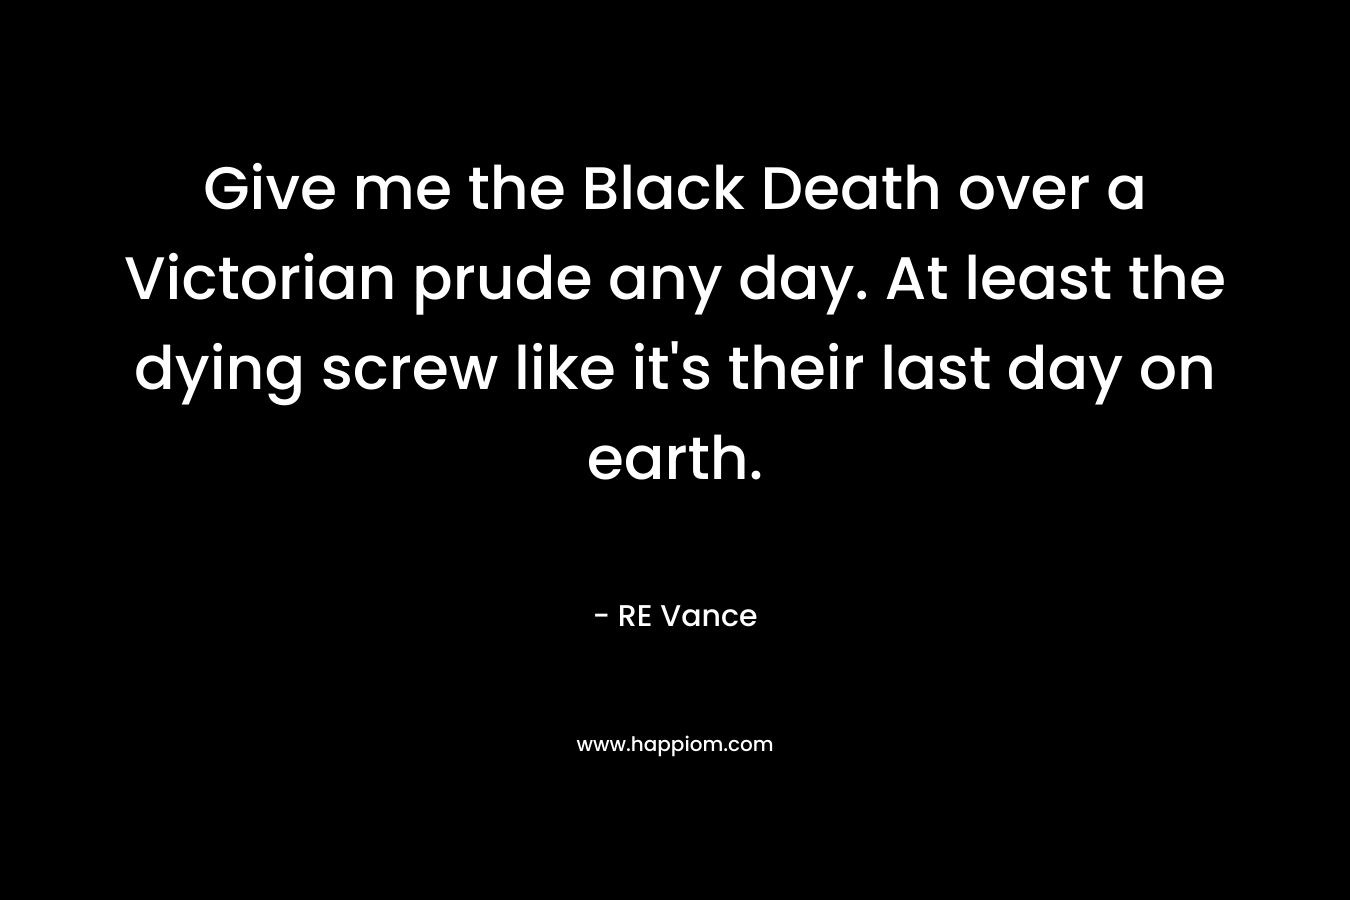 Give me the Black Death over a Victorian prude any day. At least the dying screw like it's their last day on earth.